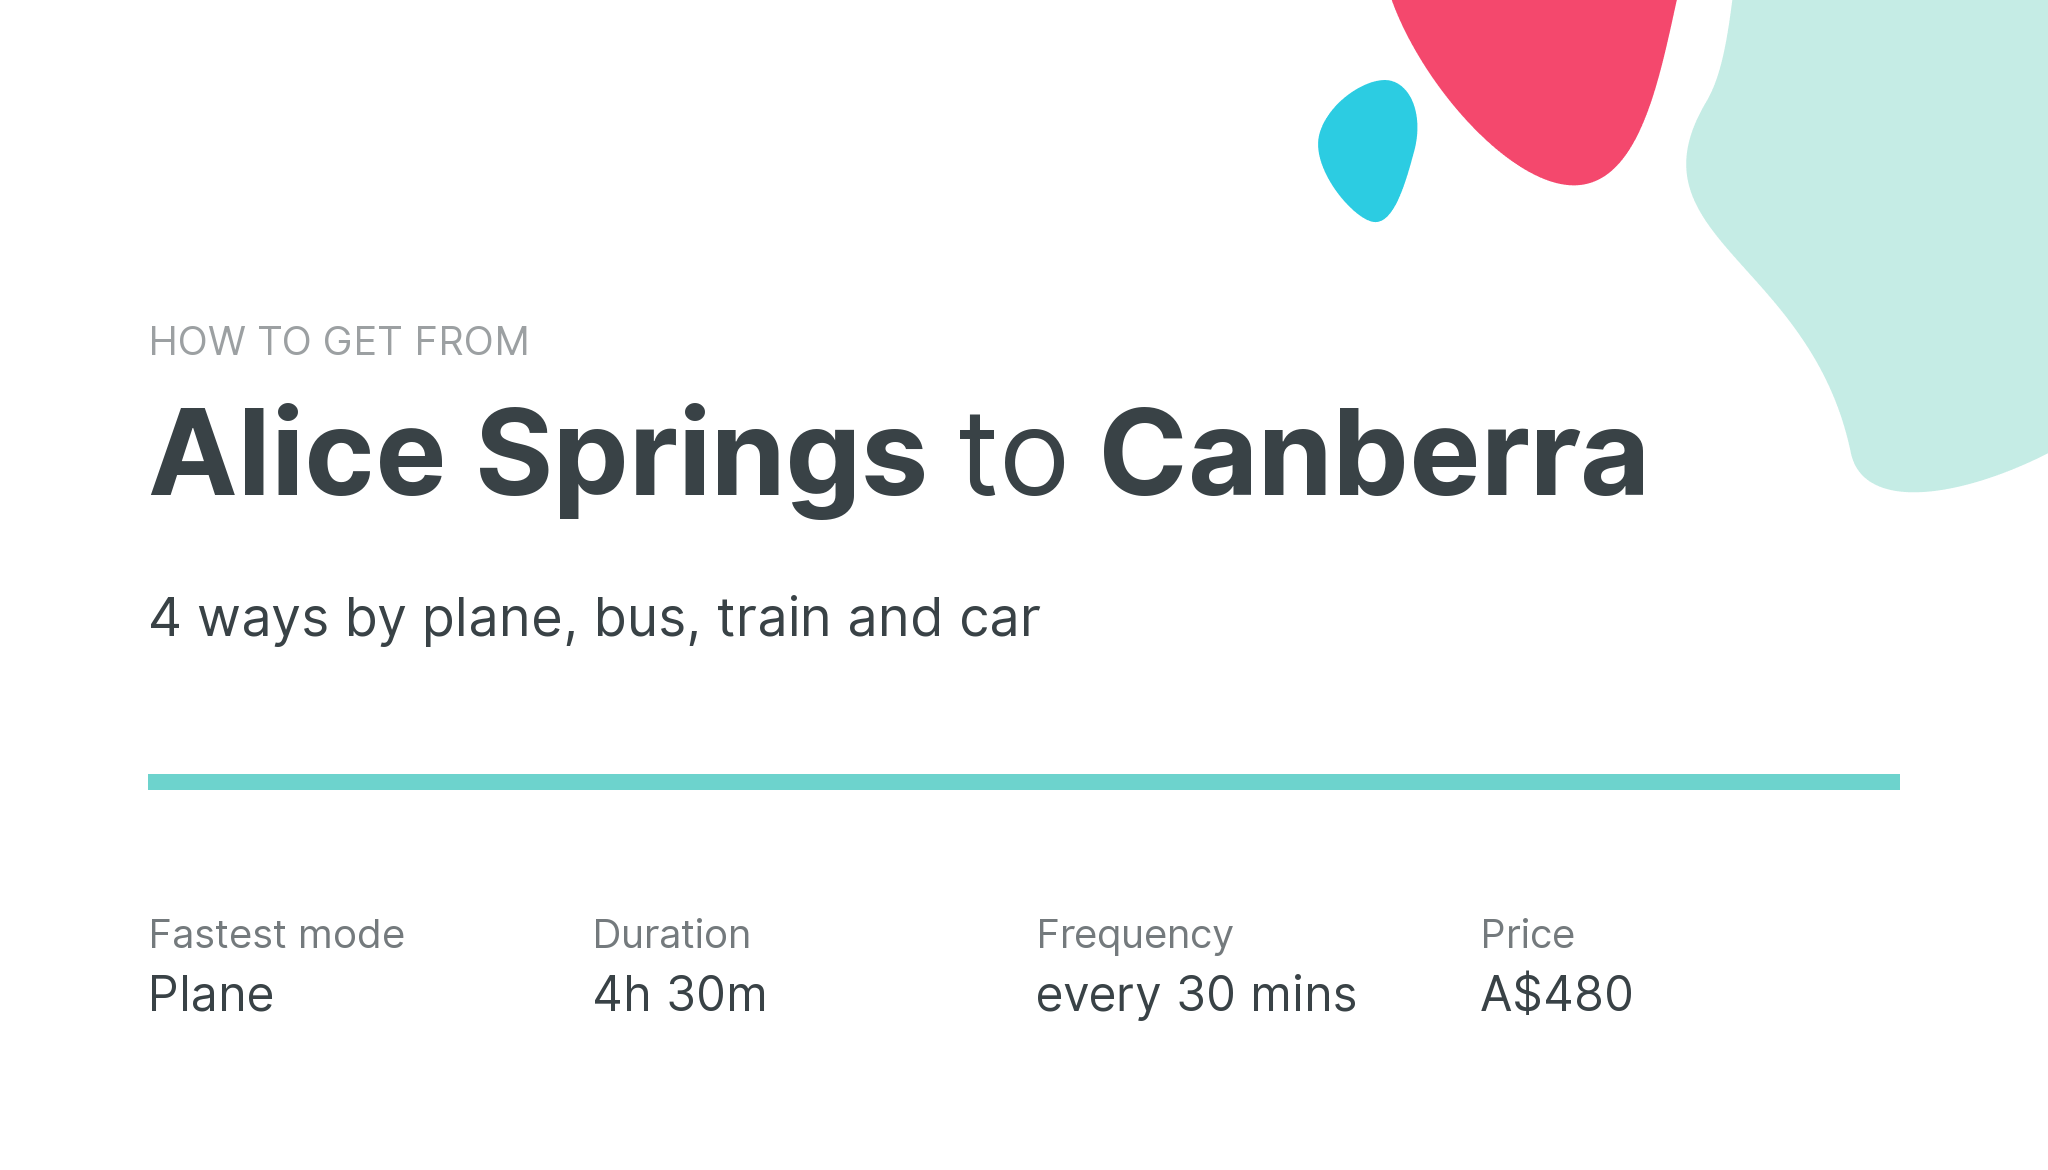 How do I get from Alice Springs to Canberra